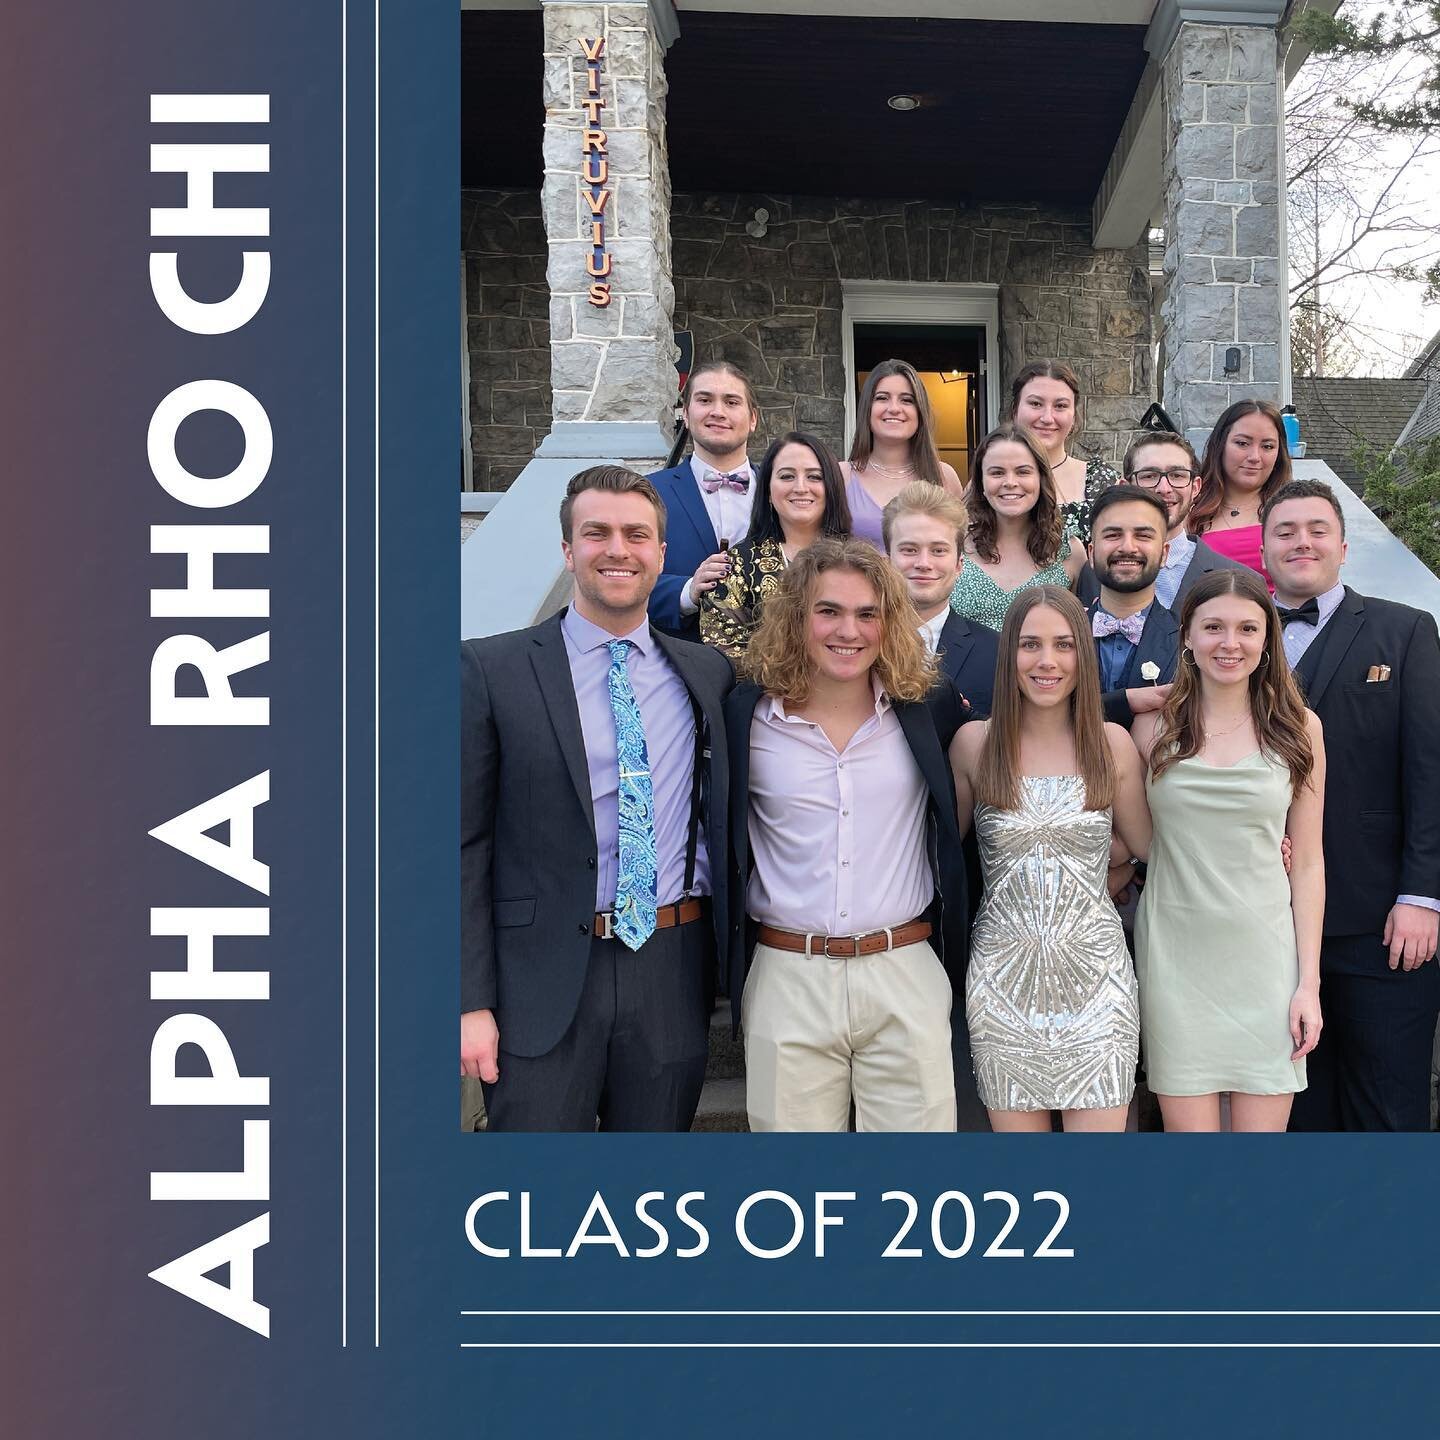 This year, the Vitruvius chapter of Alpha Rho Chi had a total of 18 brothers graduate over both semesters! Congratulations and best of luck in your futures❤️💙